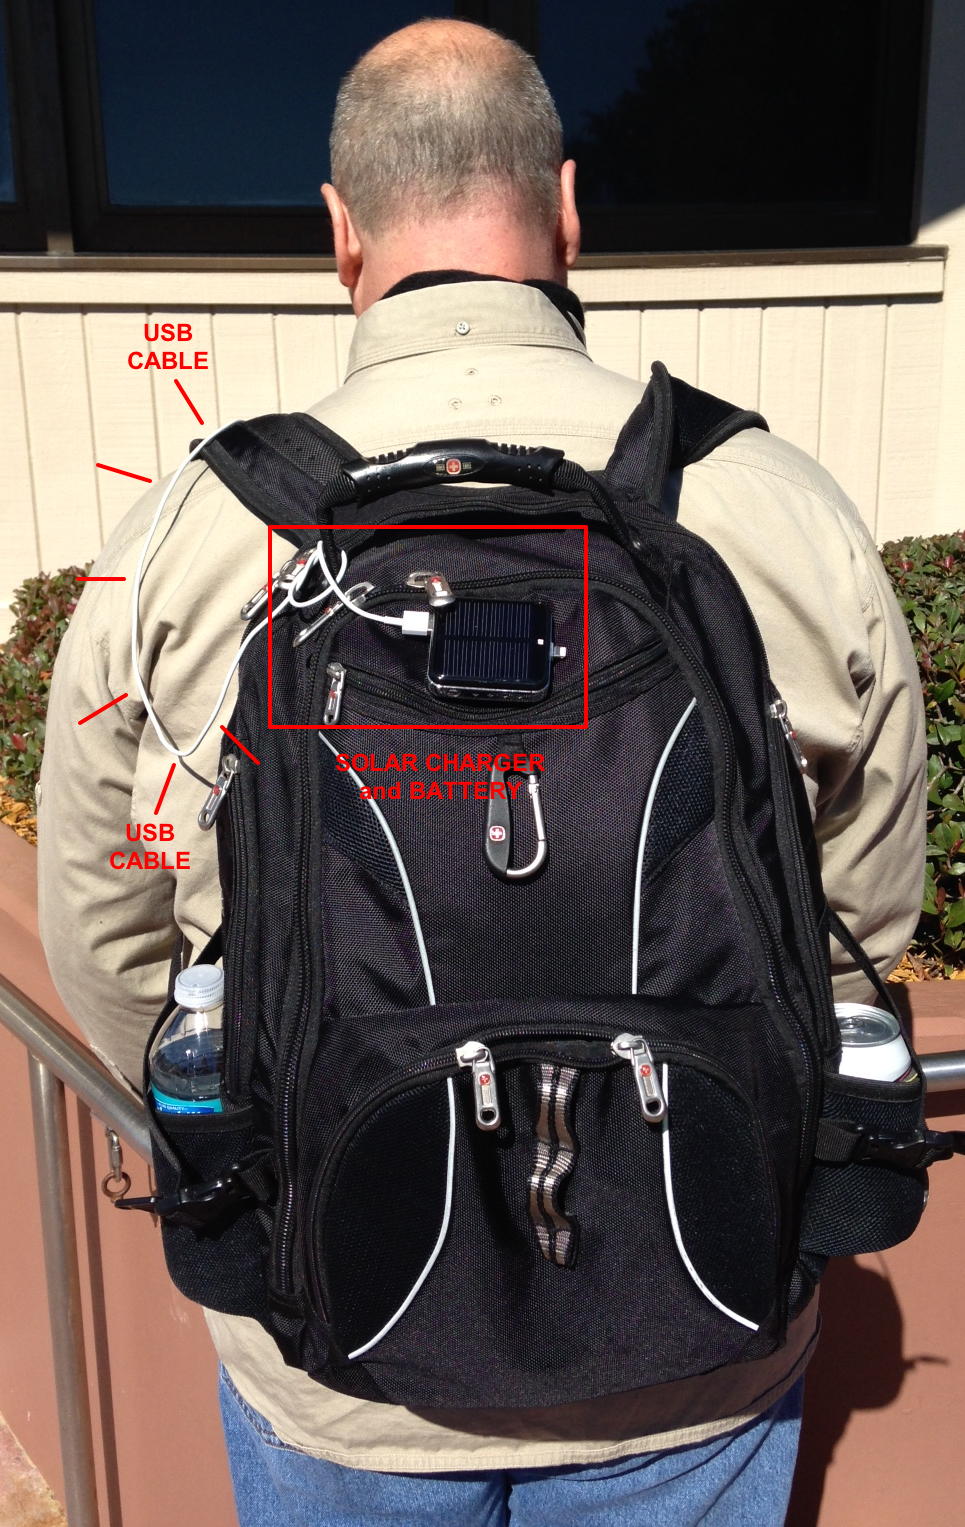 Here's the solar charging battery back, mounted with Velcro to the backpack.